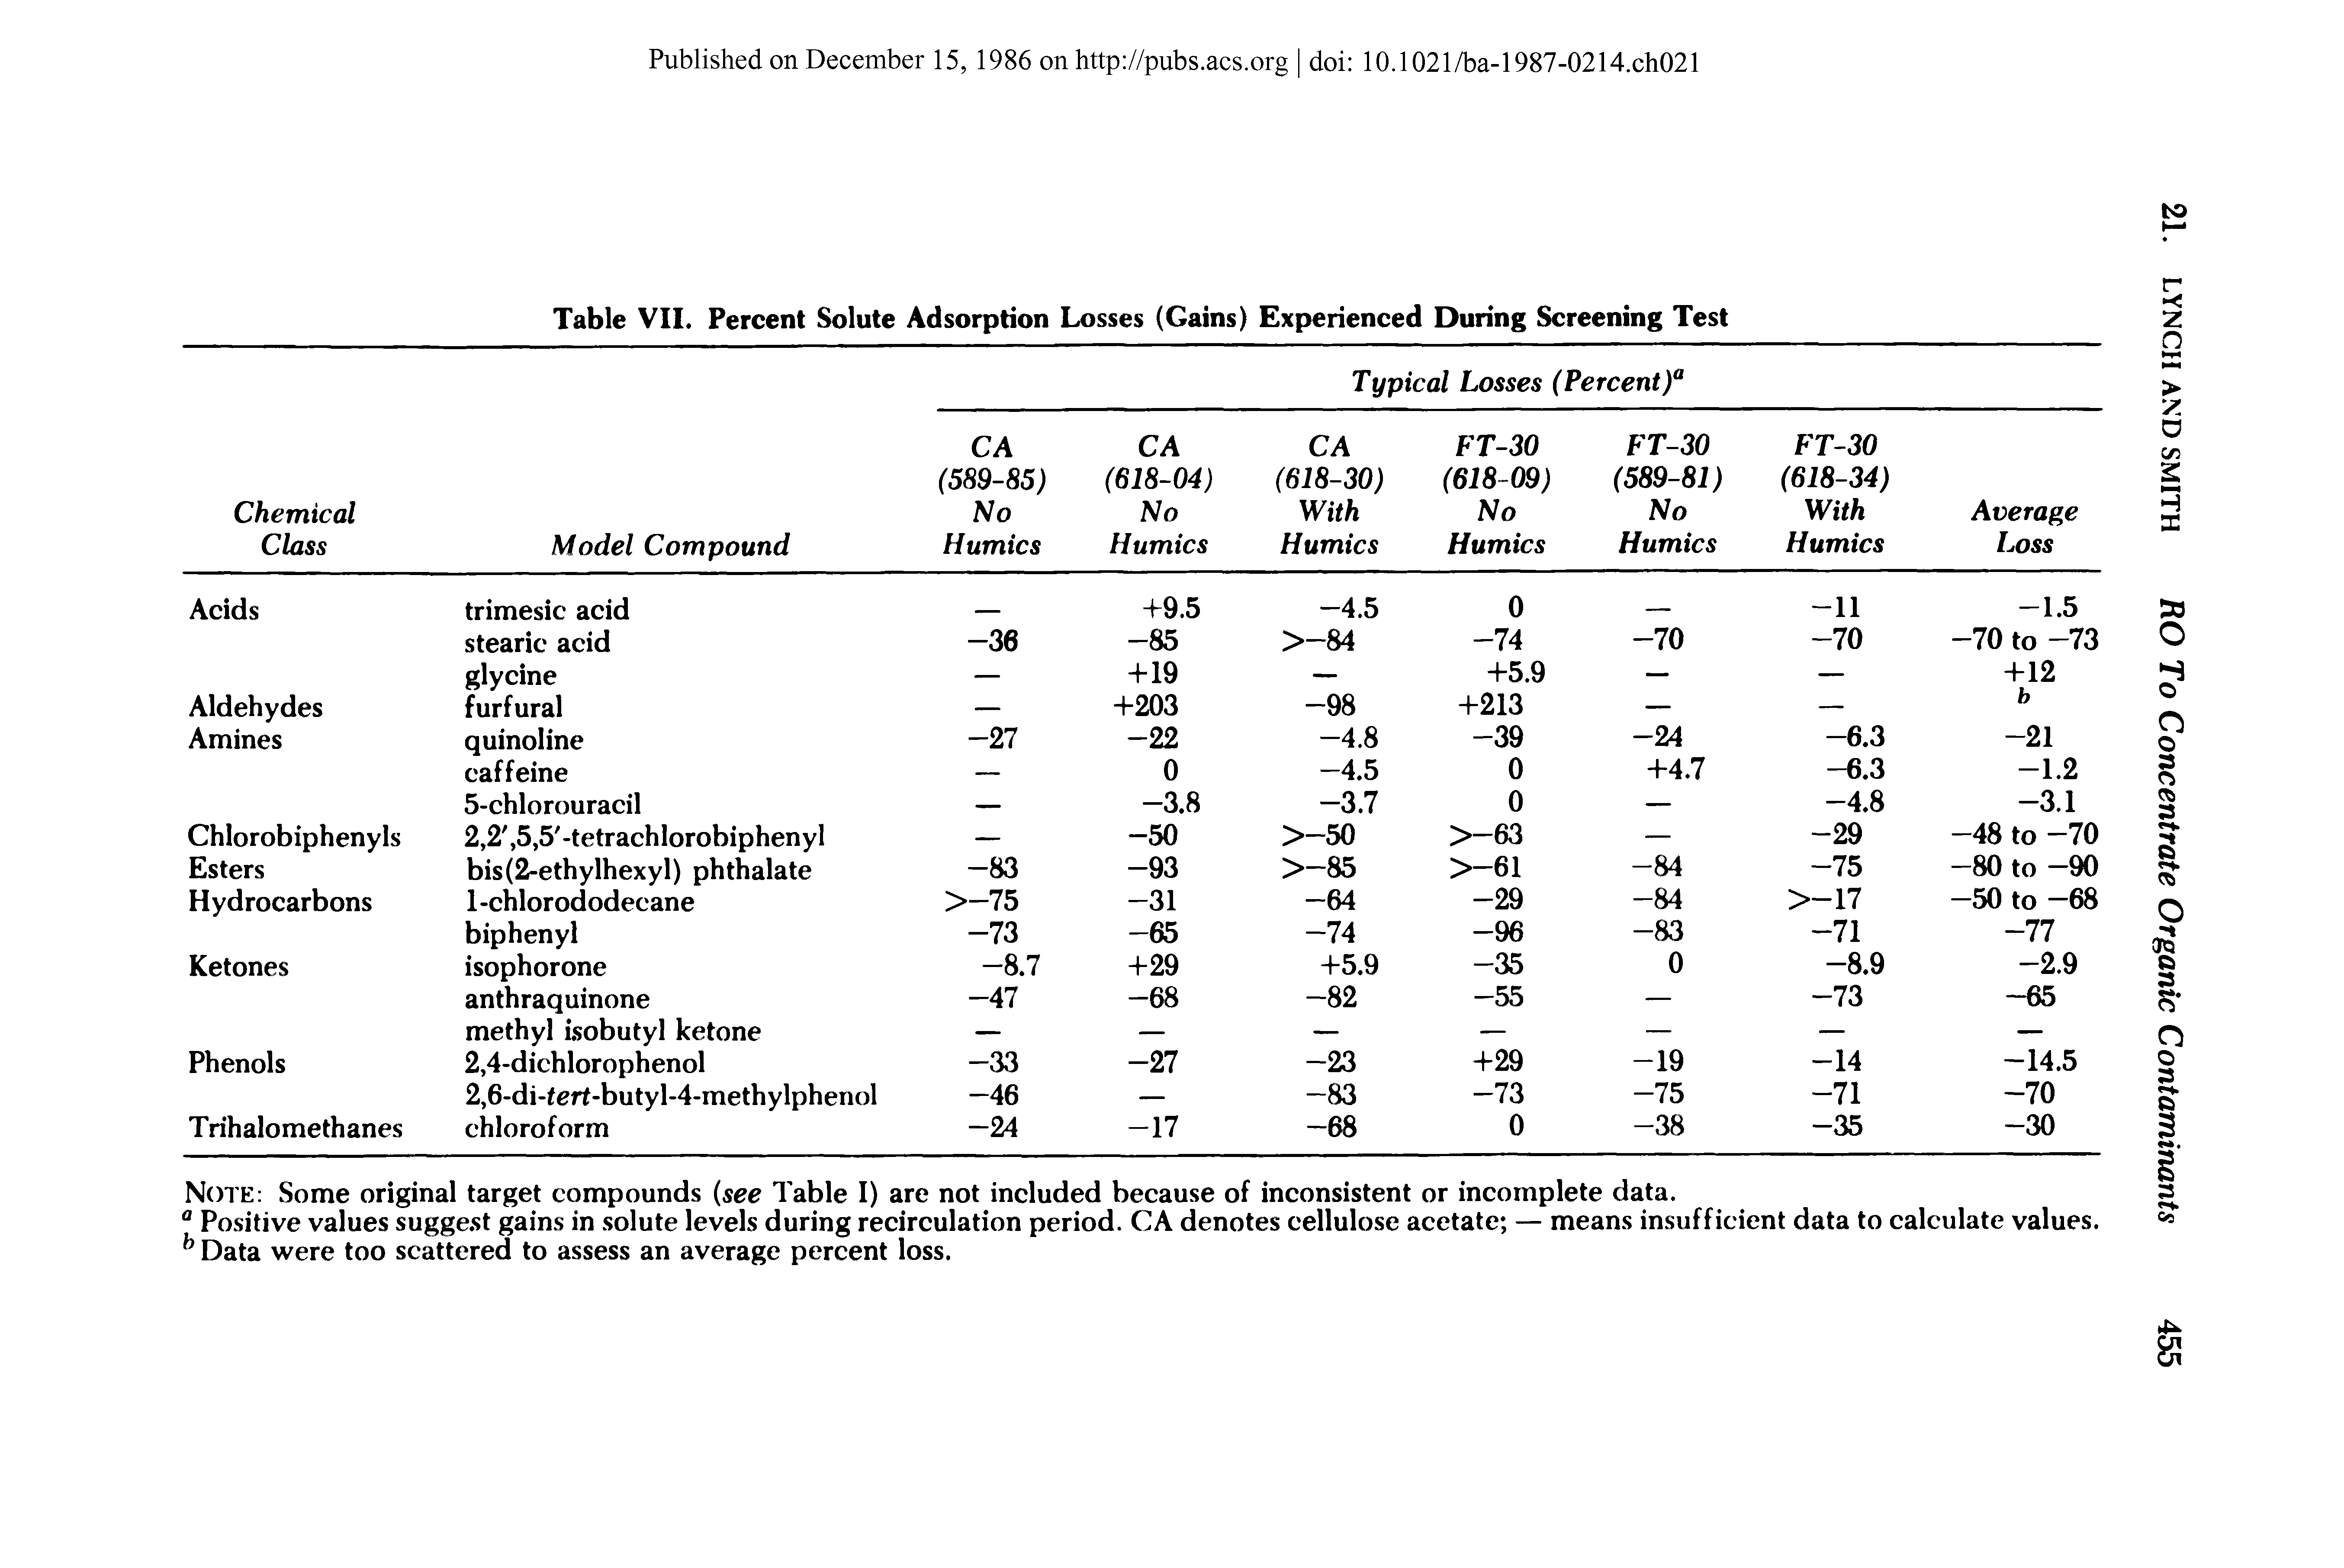 Table VII. Percent Solute Adsorption Losses (Gains) Experienced During Screening Test...